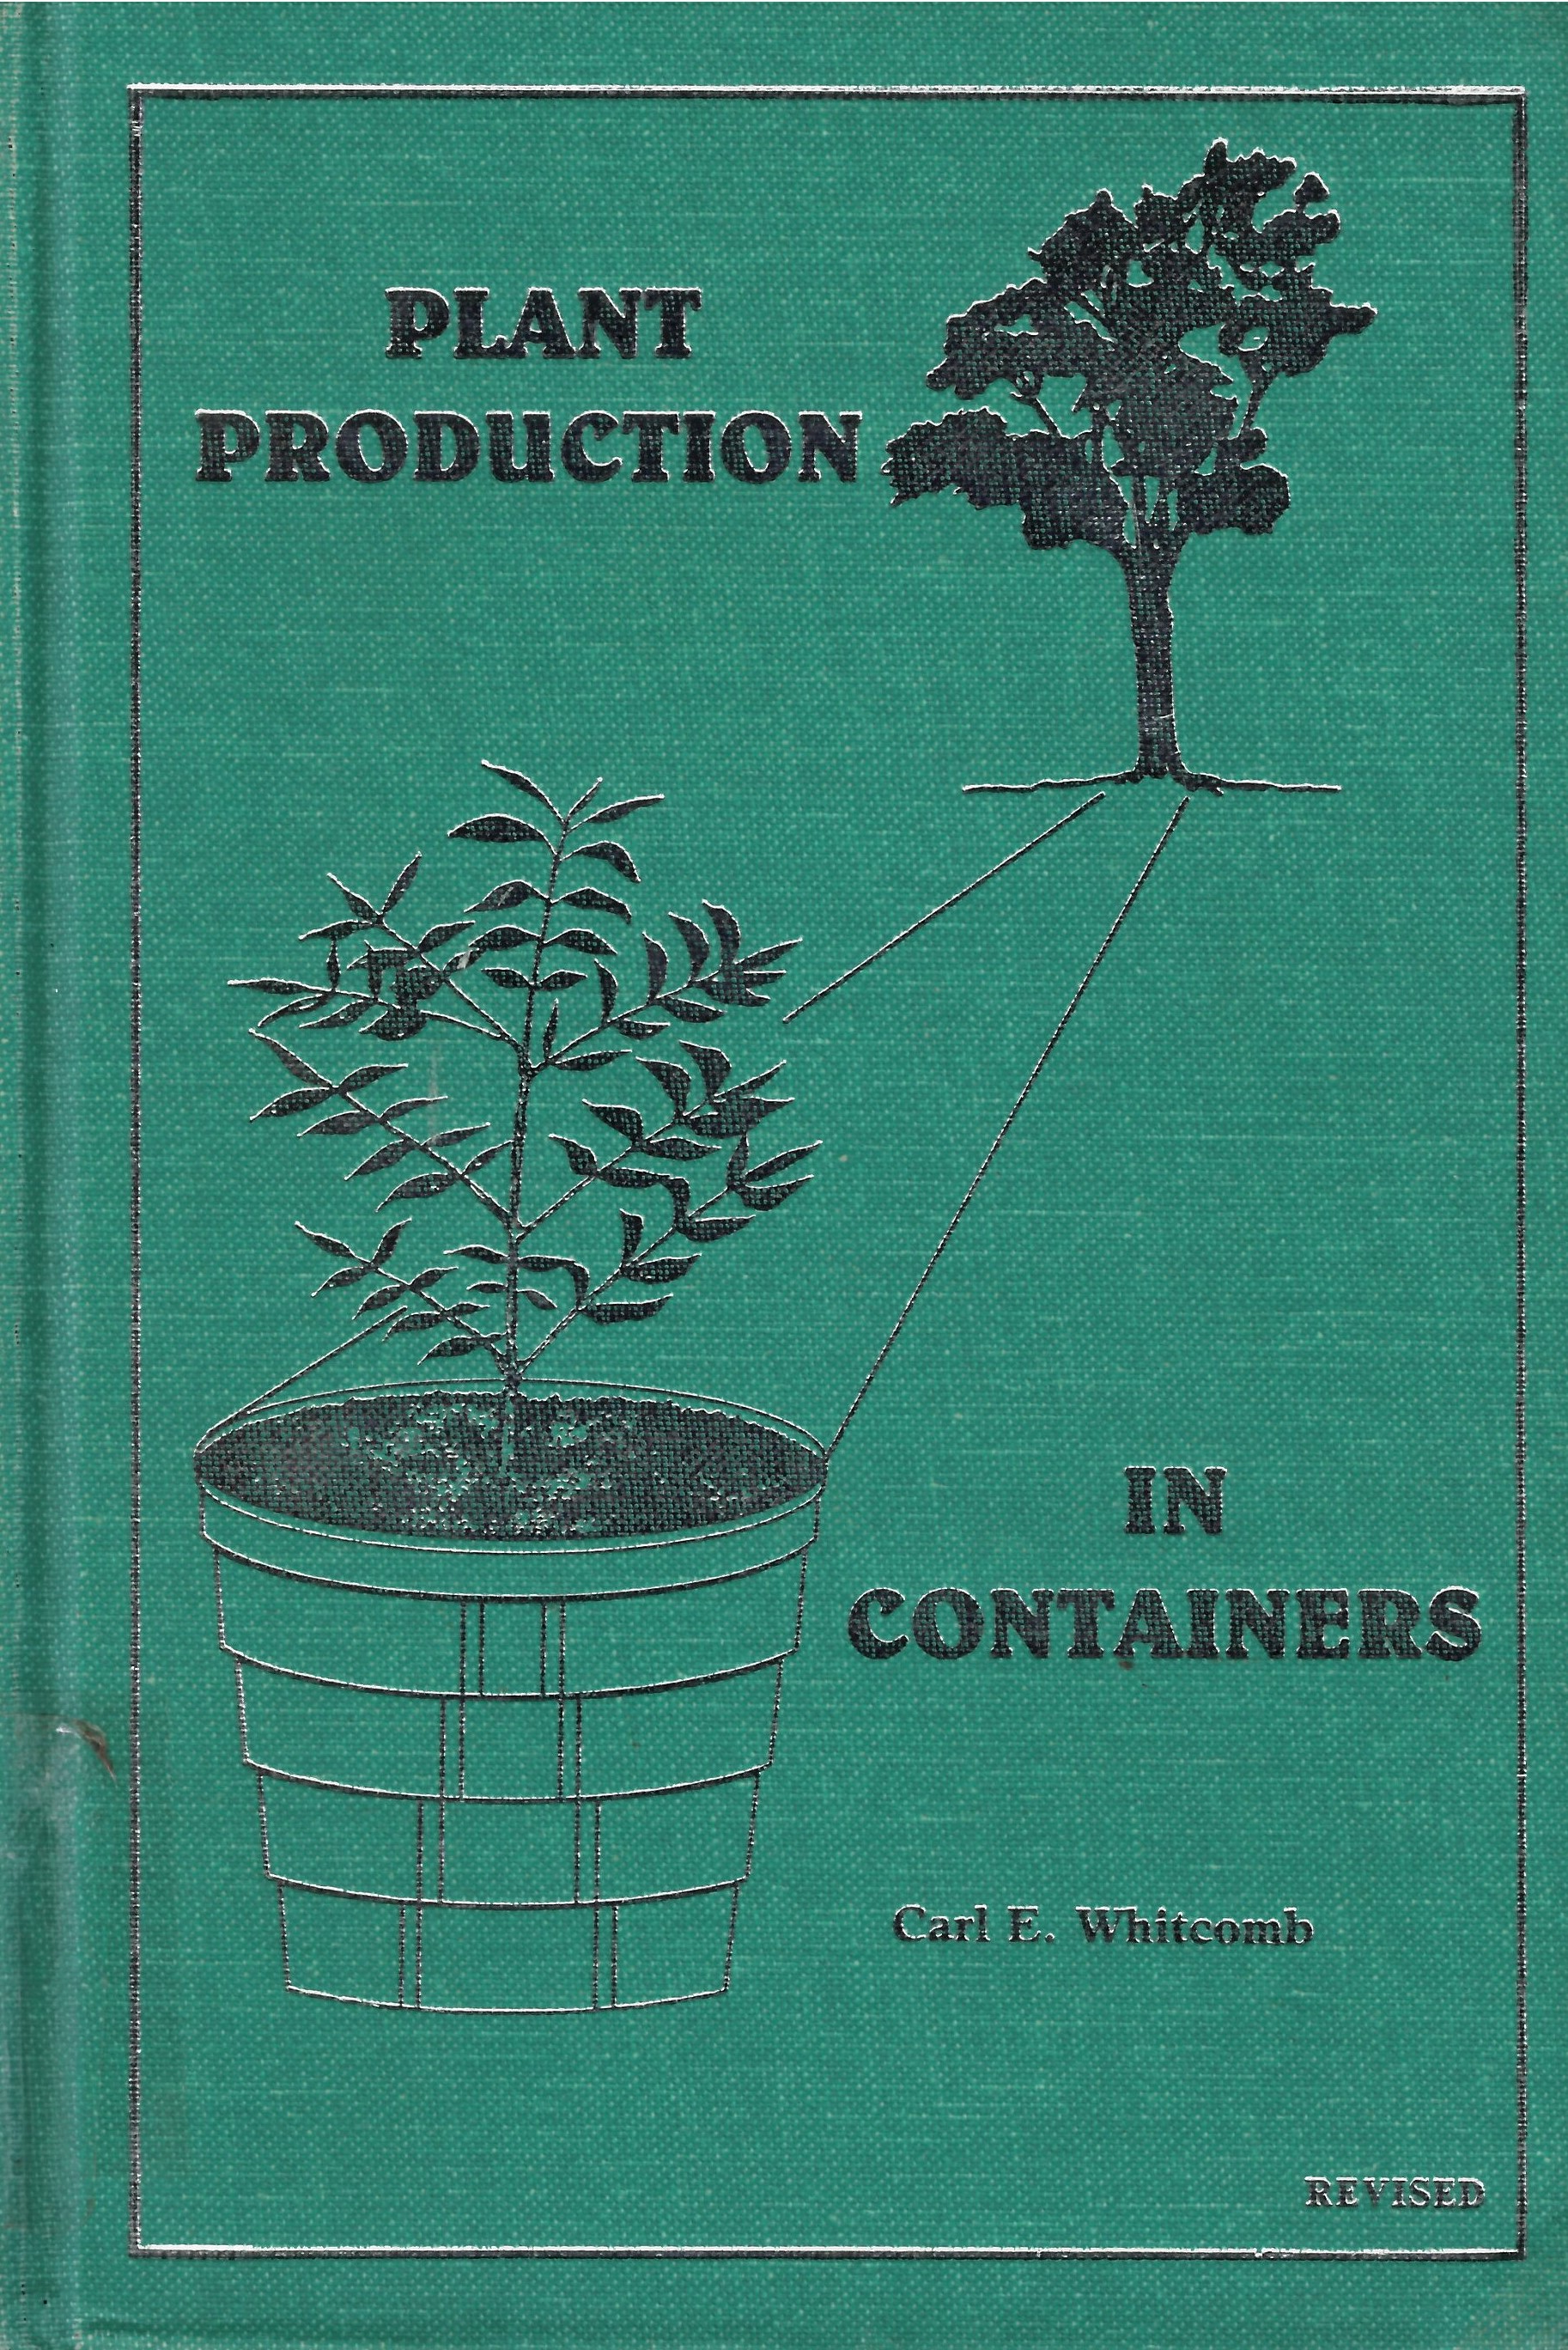 Plant production in containers